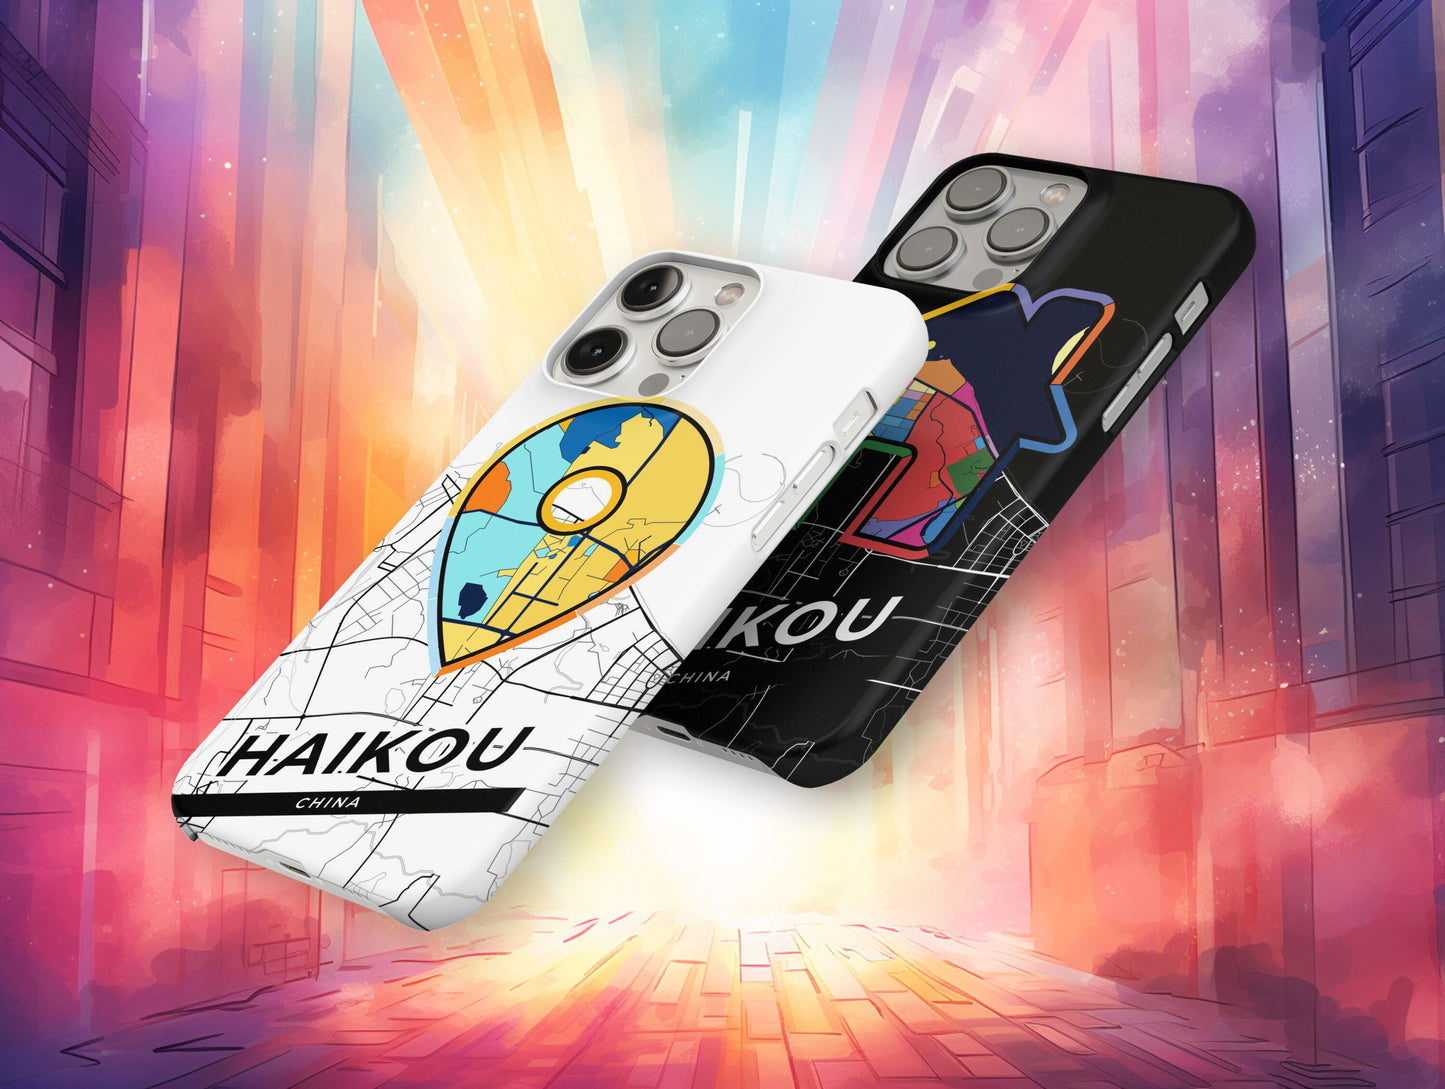 Haikou China slim phone case with colorful icon. Birthday, wedding or housewarming gift. Couple match cases.